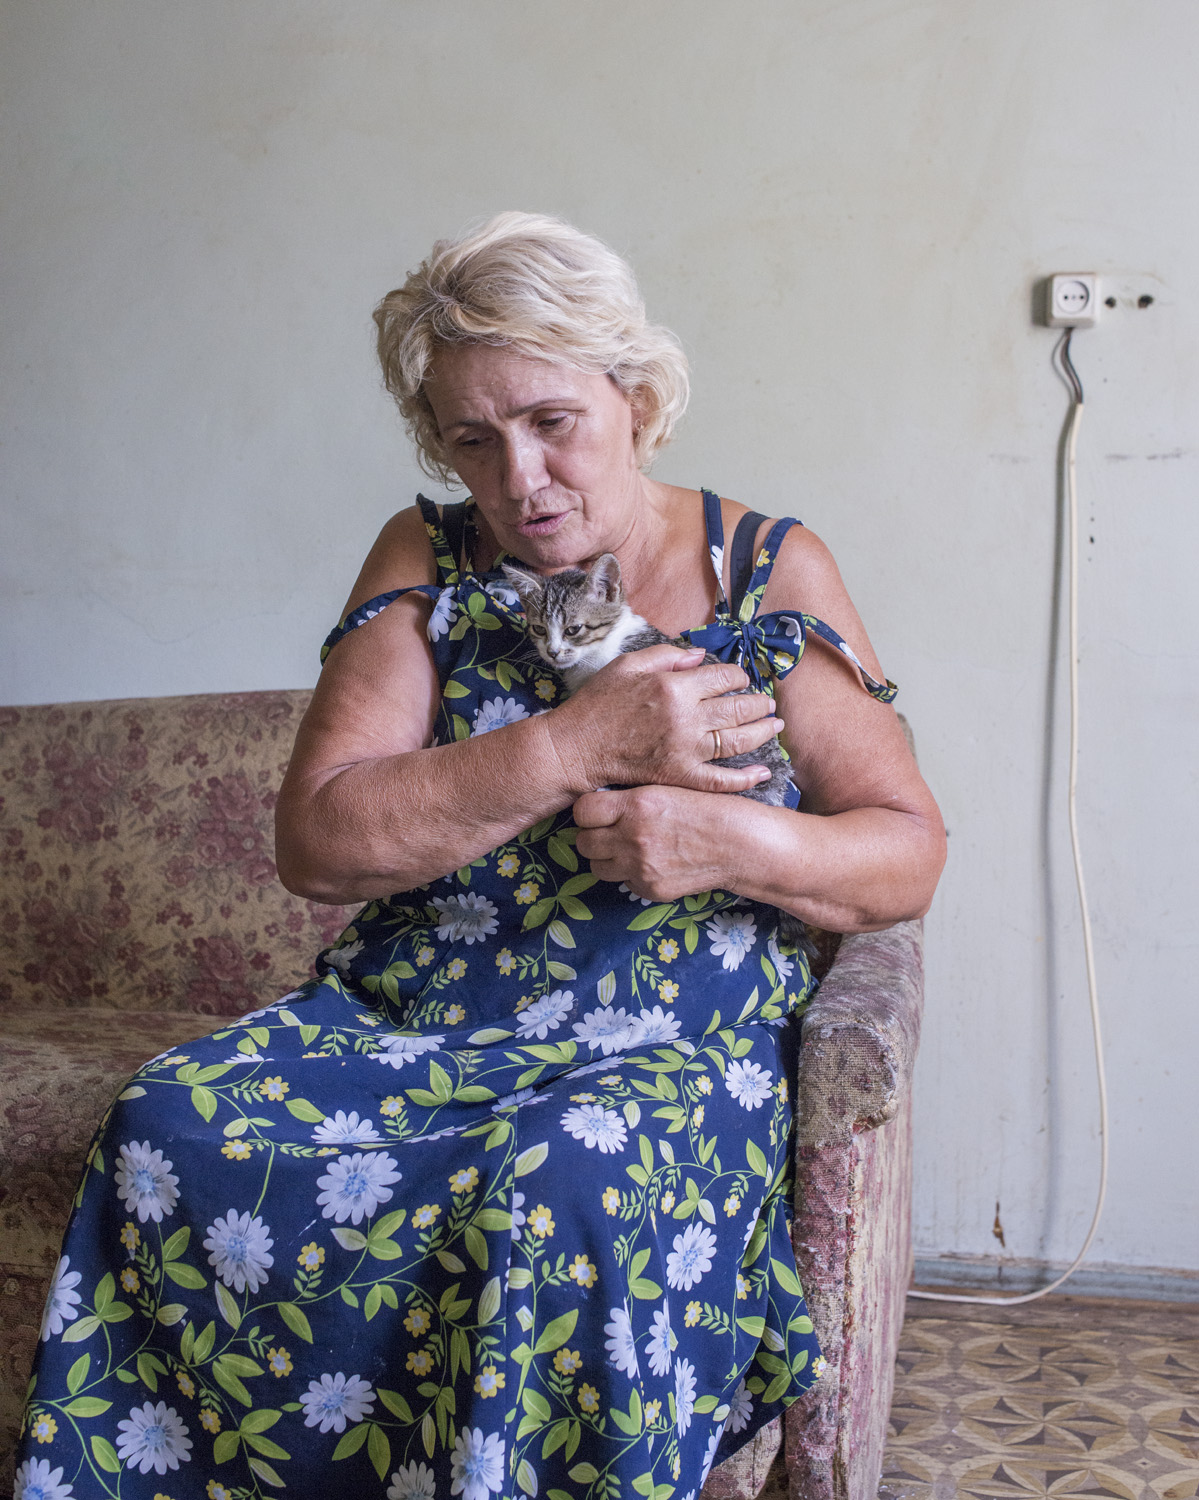  Marie, 70, lives in the government-assisted shelter Collective Center in the city of Mariupol after fleeing shelling in the east. "This kitten is named Mariska. She heals me by taking away bad energy."    